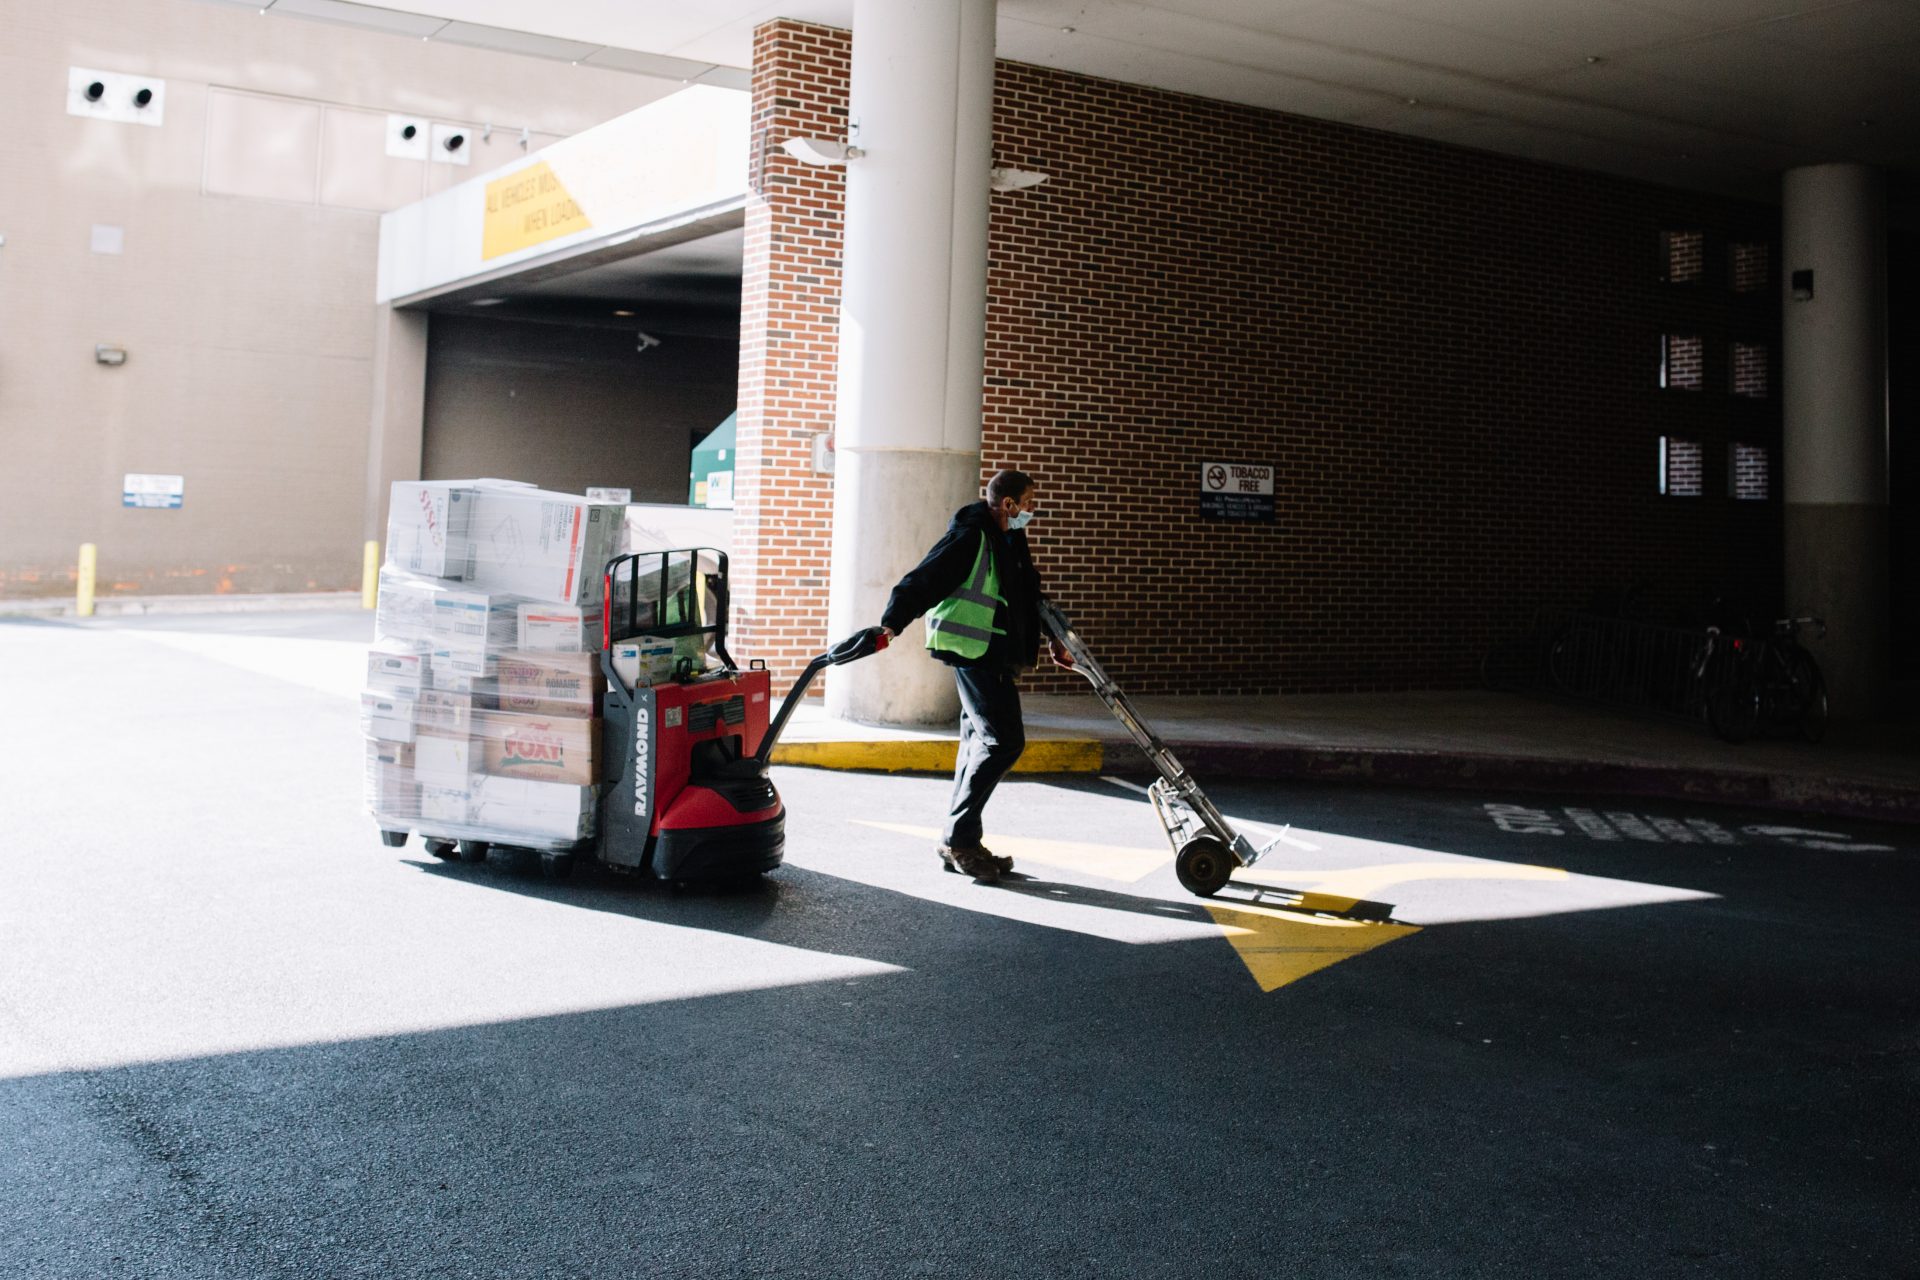 A worker hauls boxes while wearing a mask in Harrisburg on April 10, 2020.